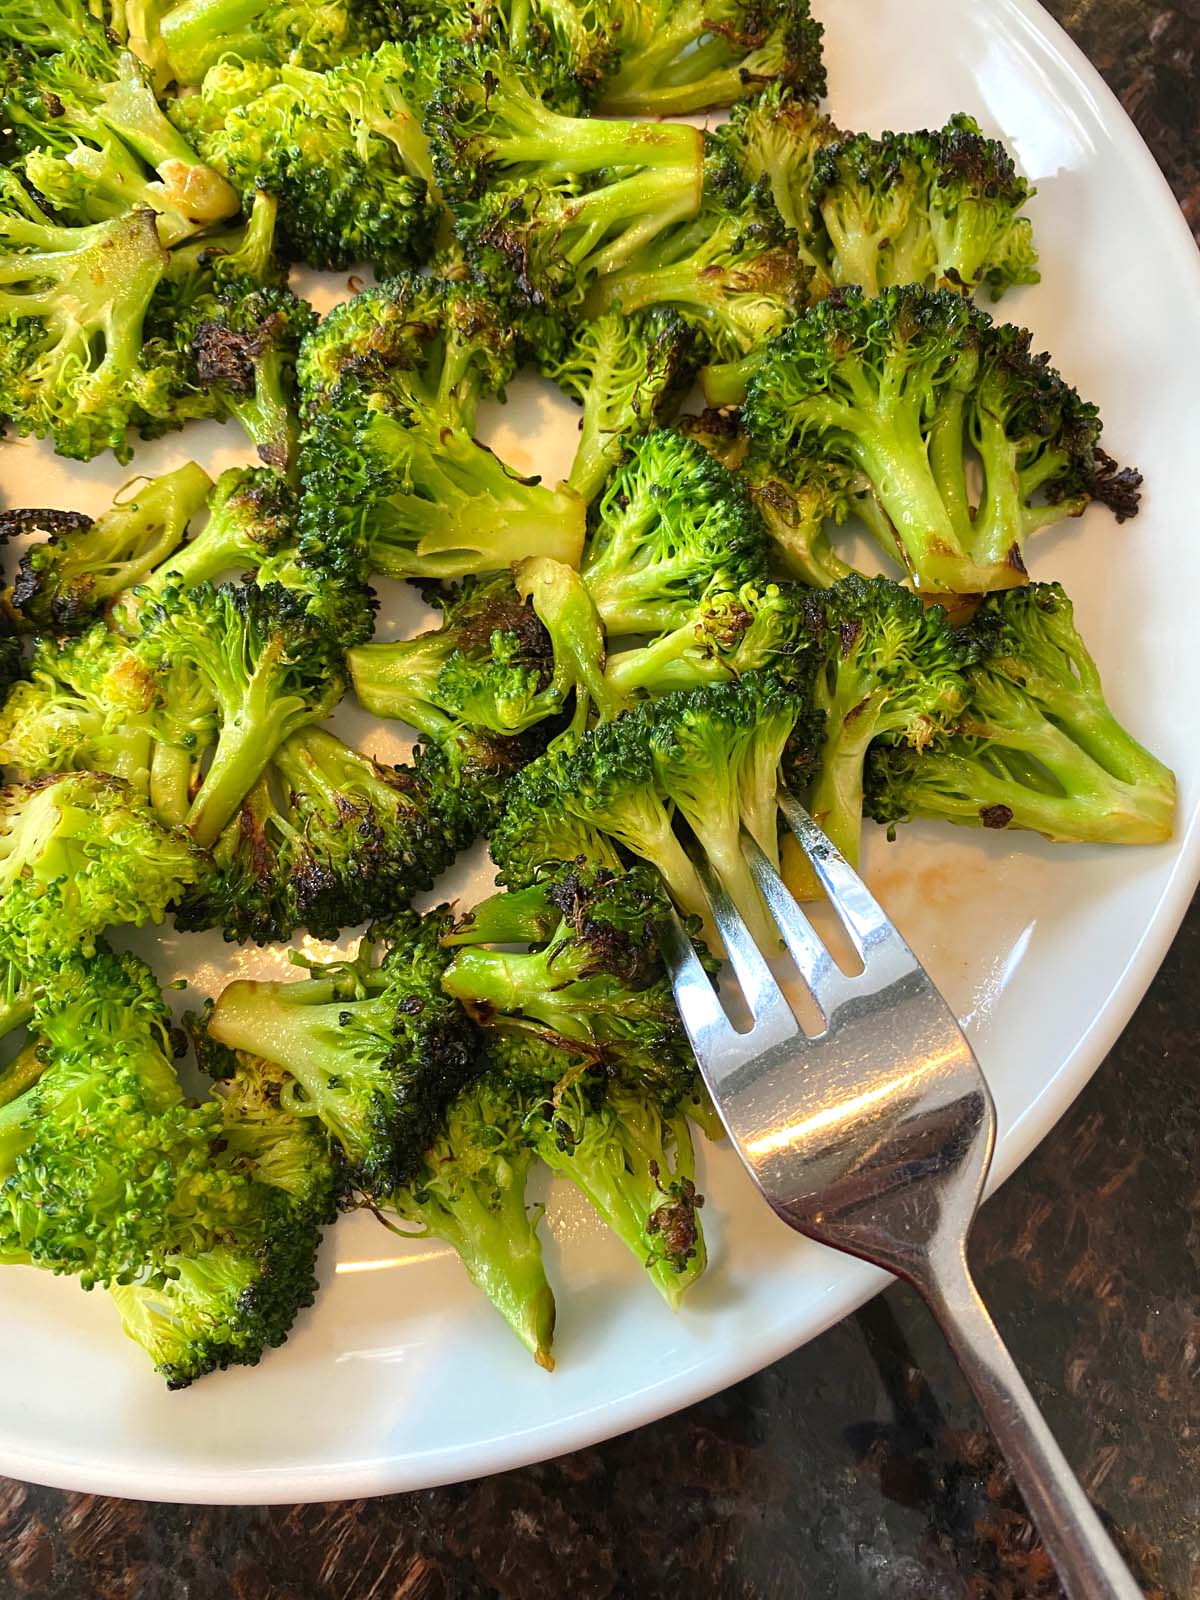 Sauteed Broccoli Recipe – How To Cook Broccoli On A Frying Pan